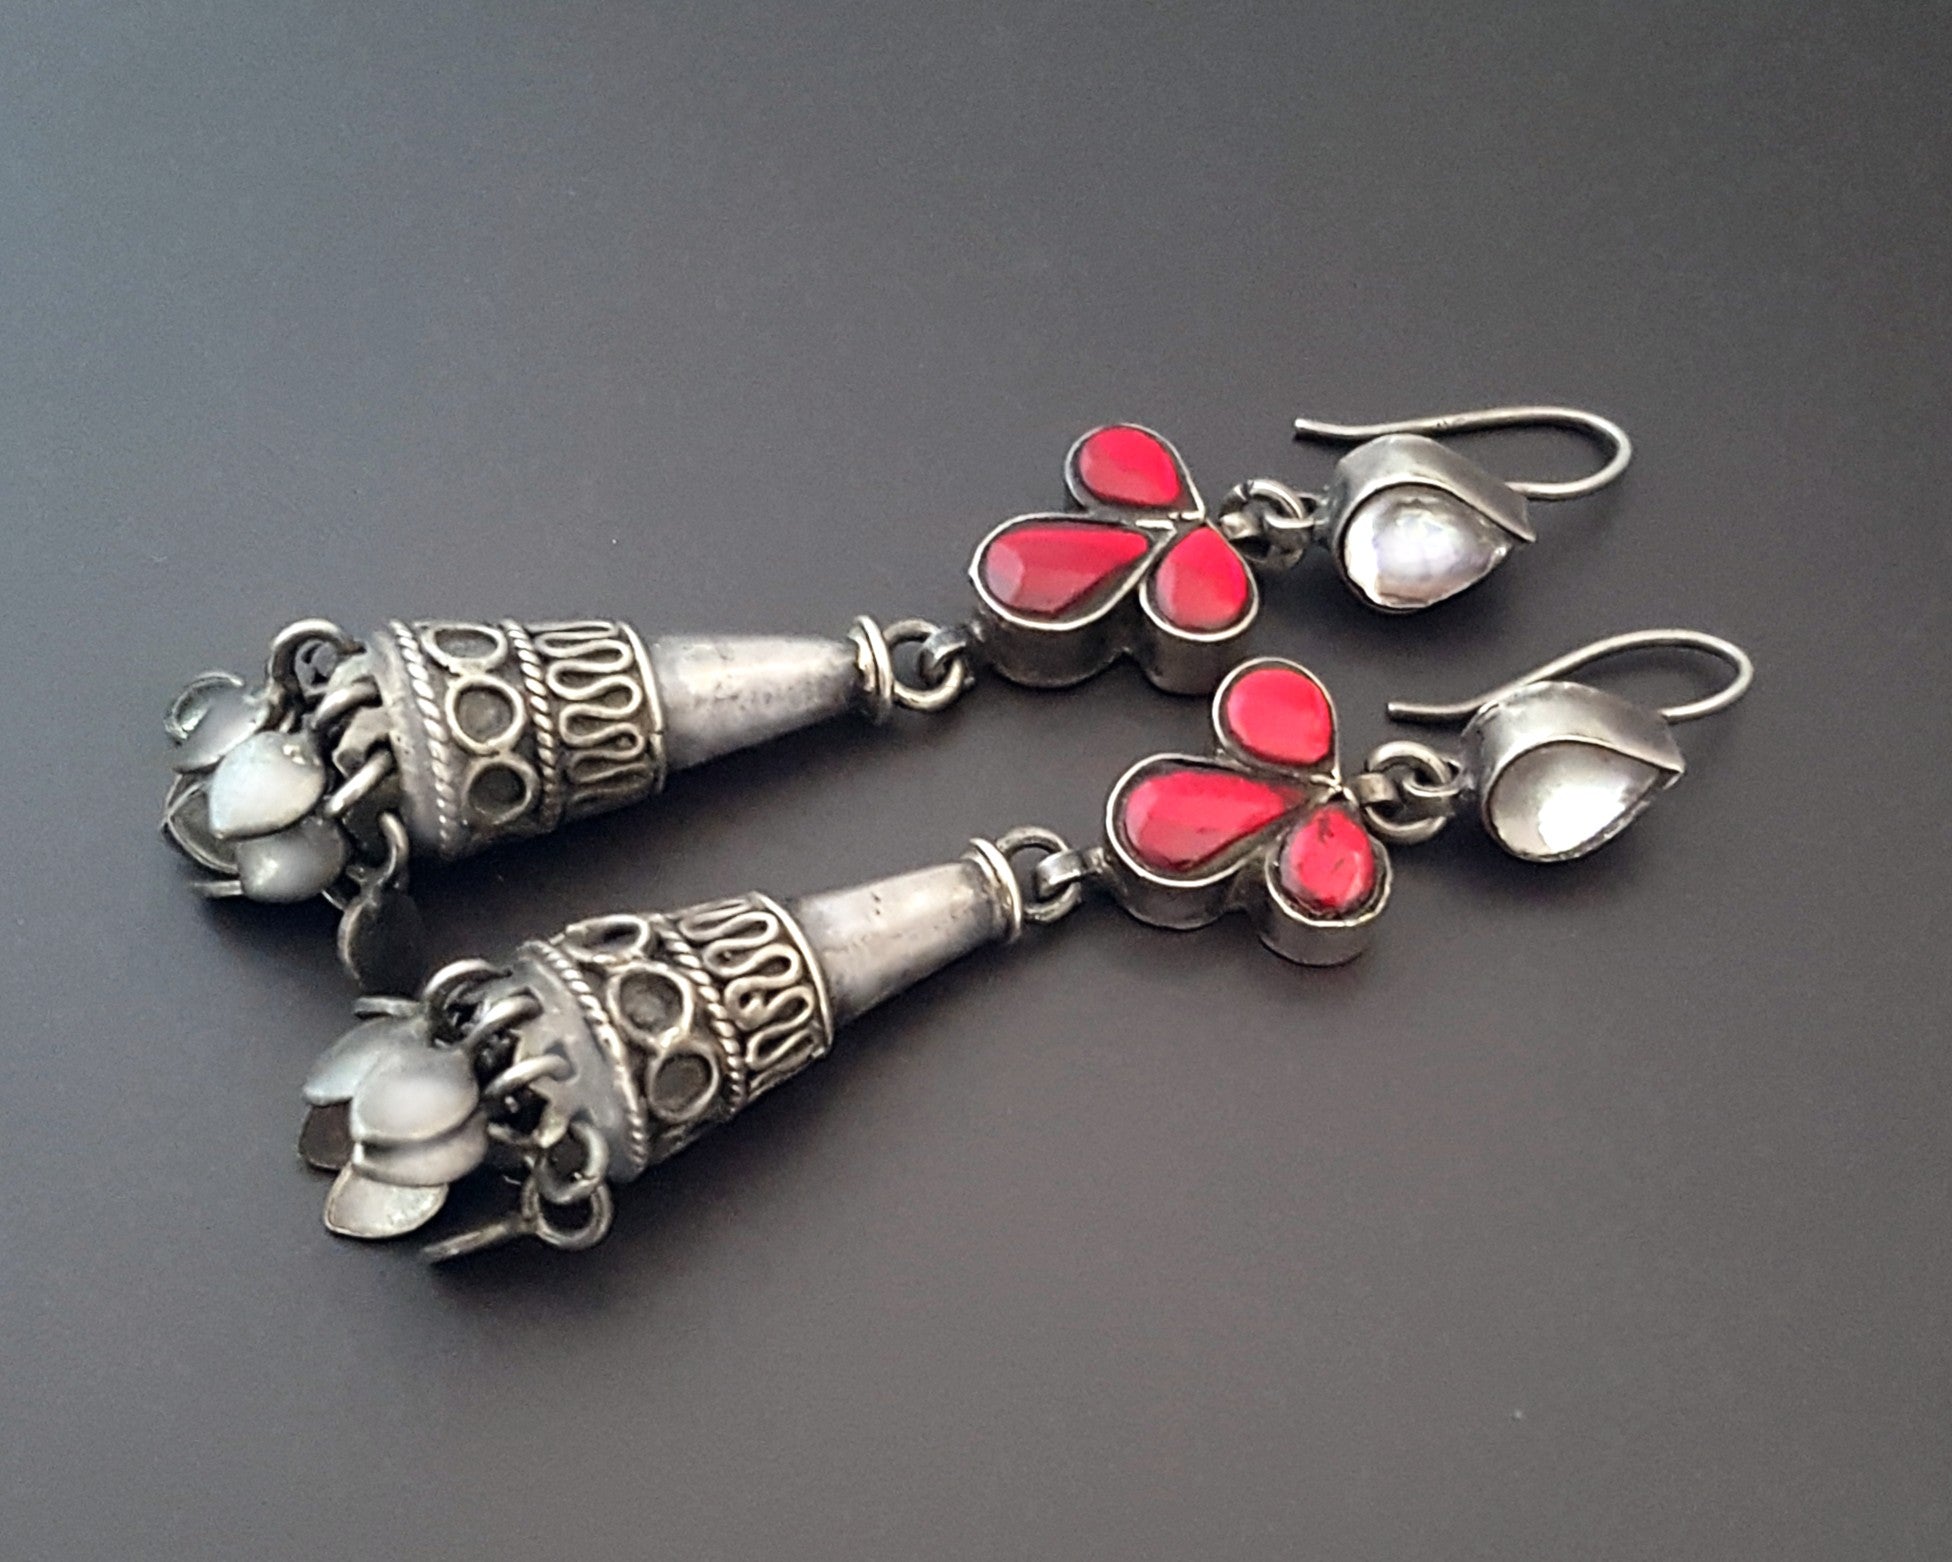 Rajasthani Earrings with Red and White Glass